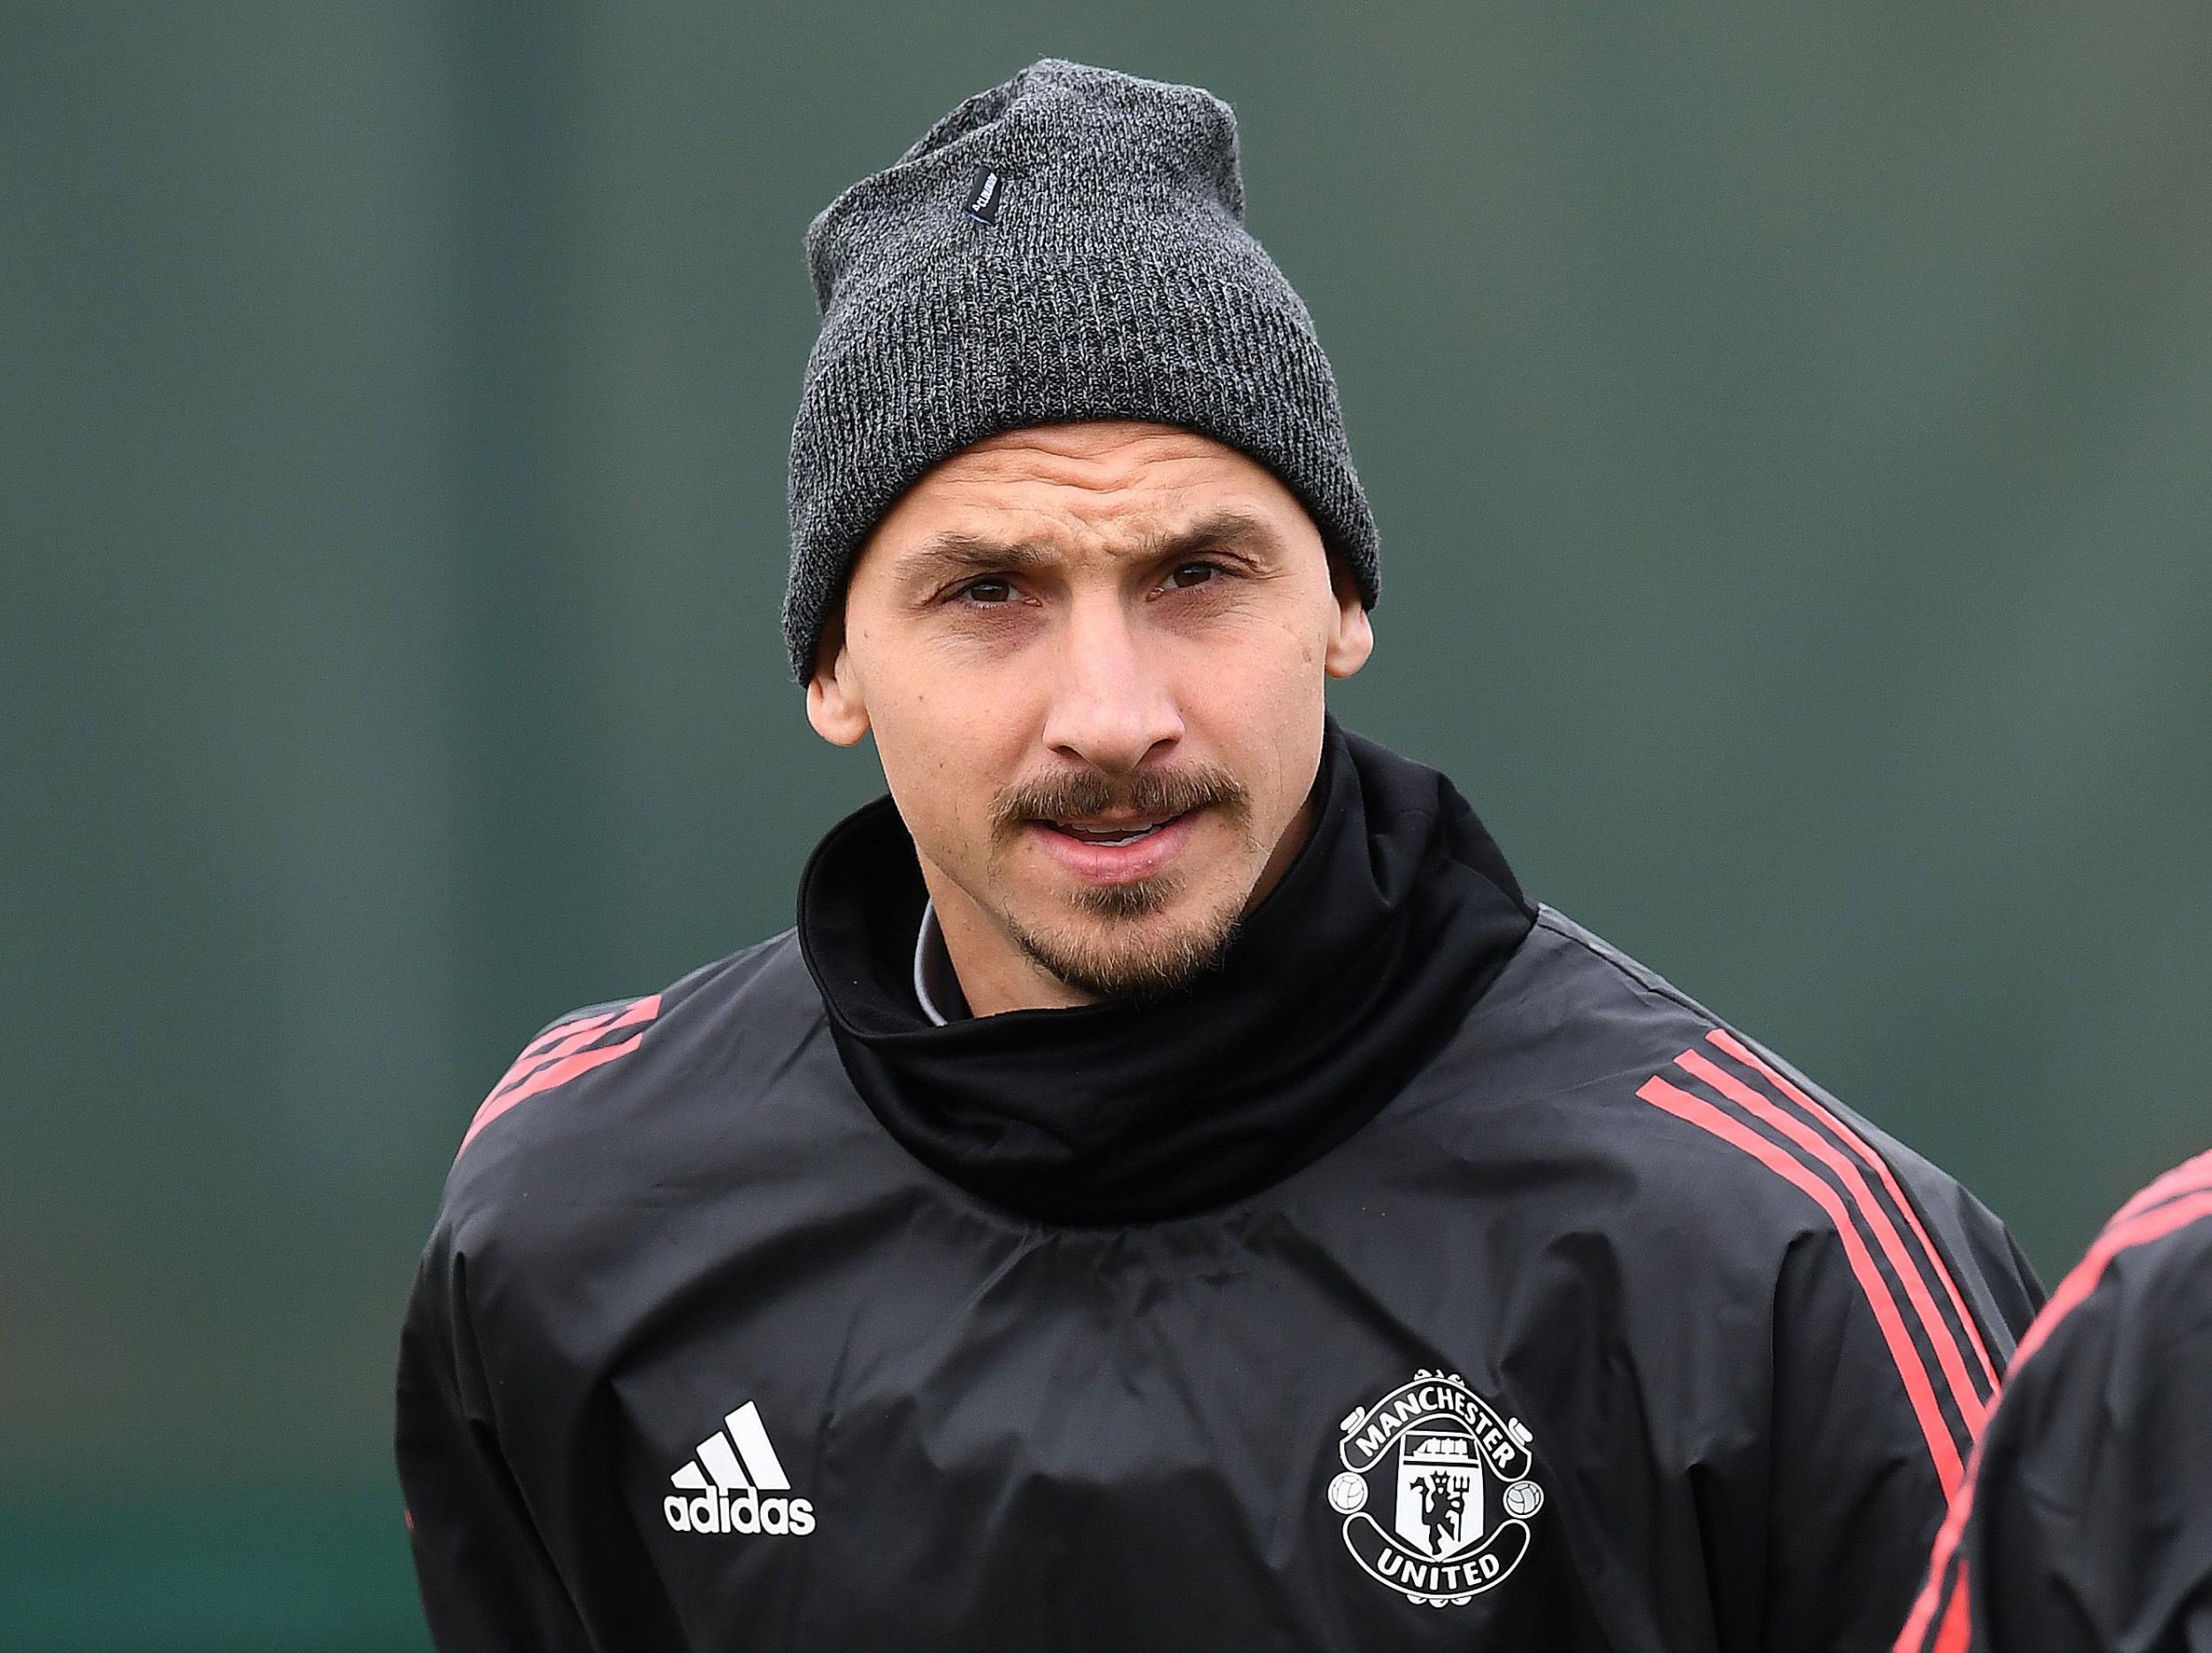 Zlatan Ibrahimovic is not yet ready to start for Manchester United